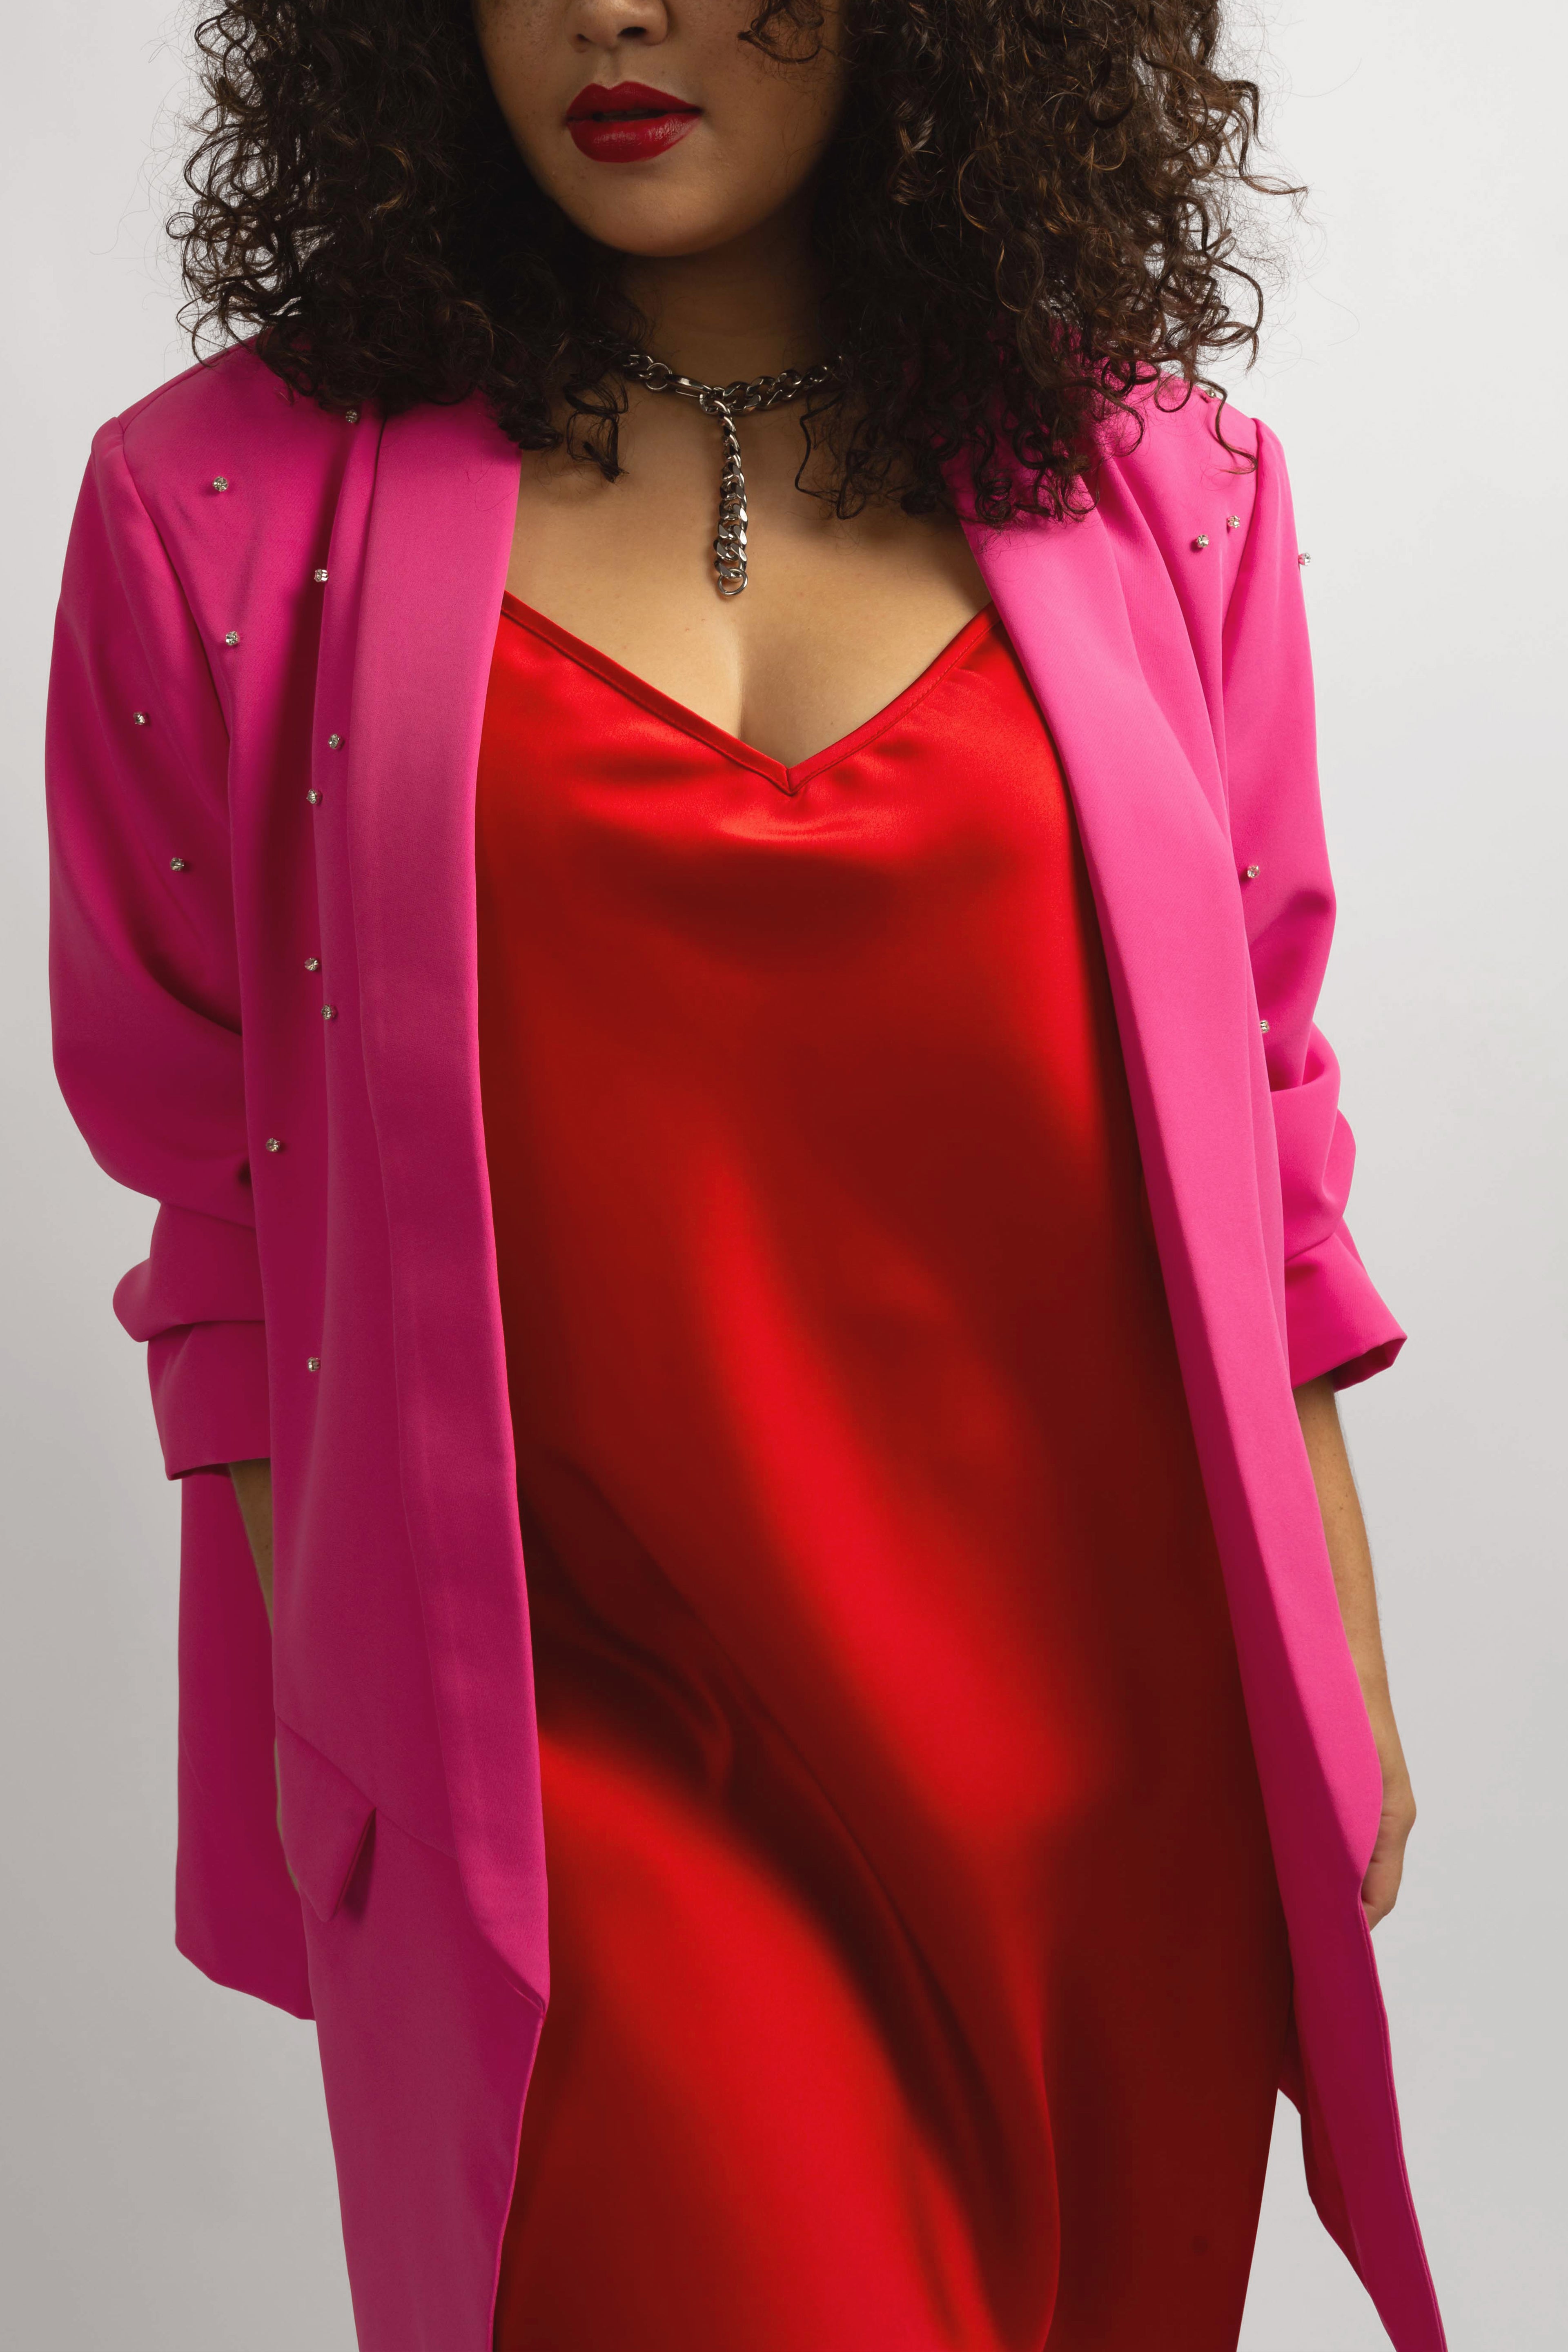 model wearing hot pink crystal blazer with red slip dress